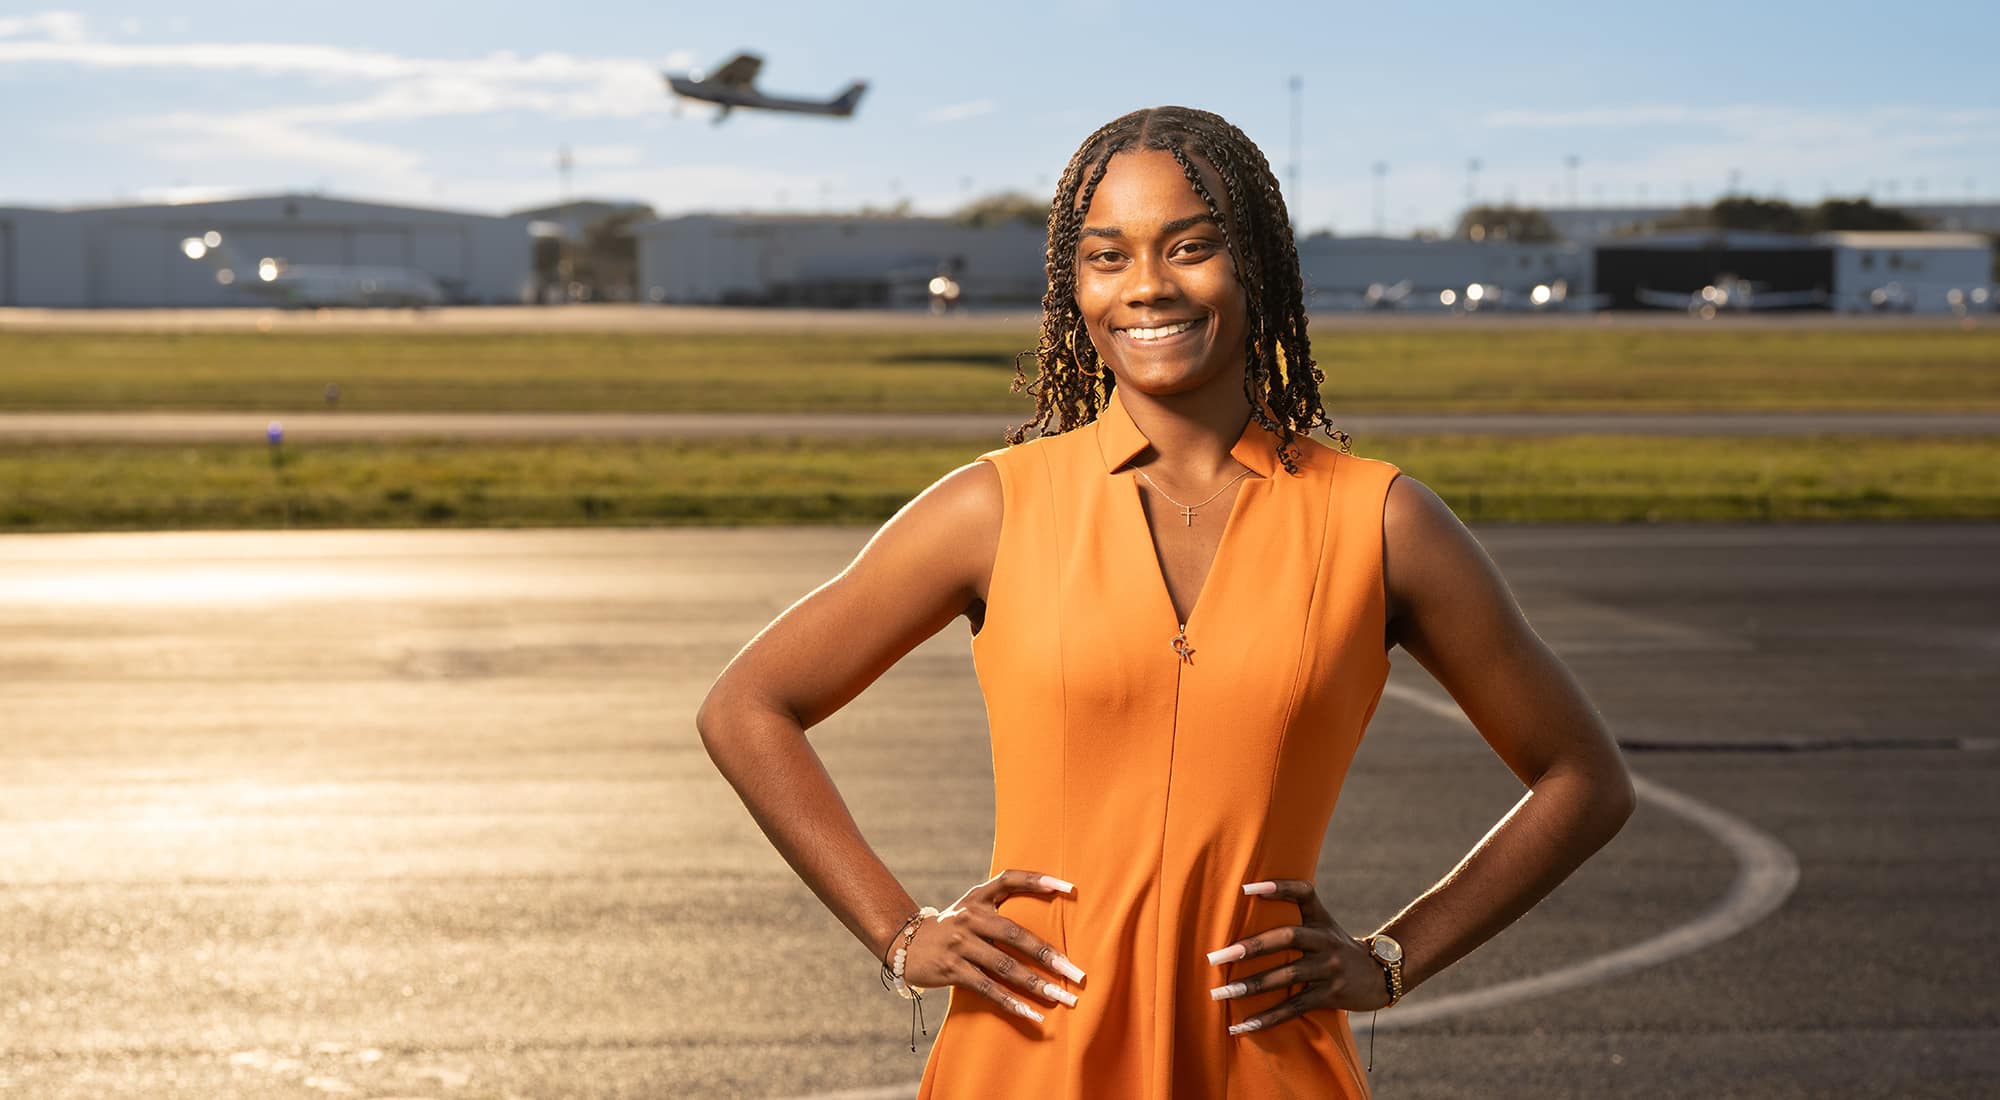 Coral, with long braided hair, poses in an orange dress, a small plane taking off in the distance.